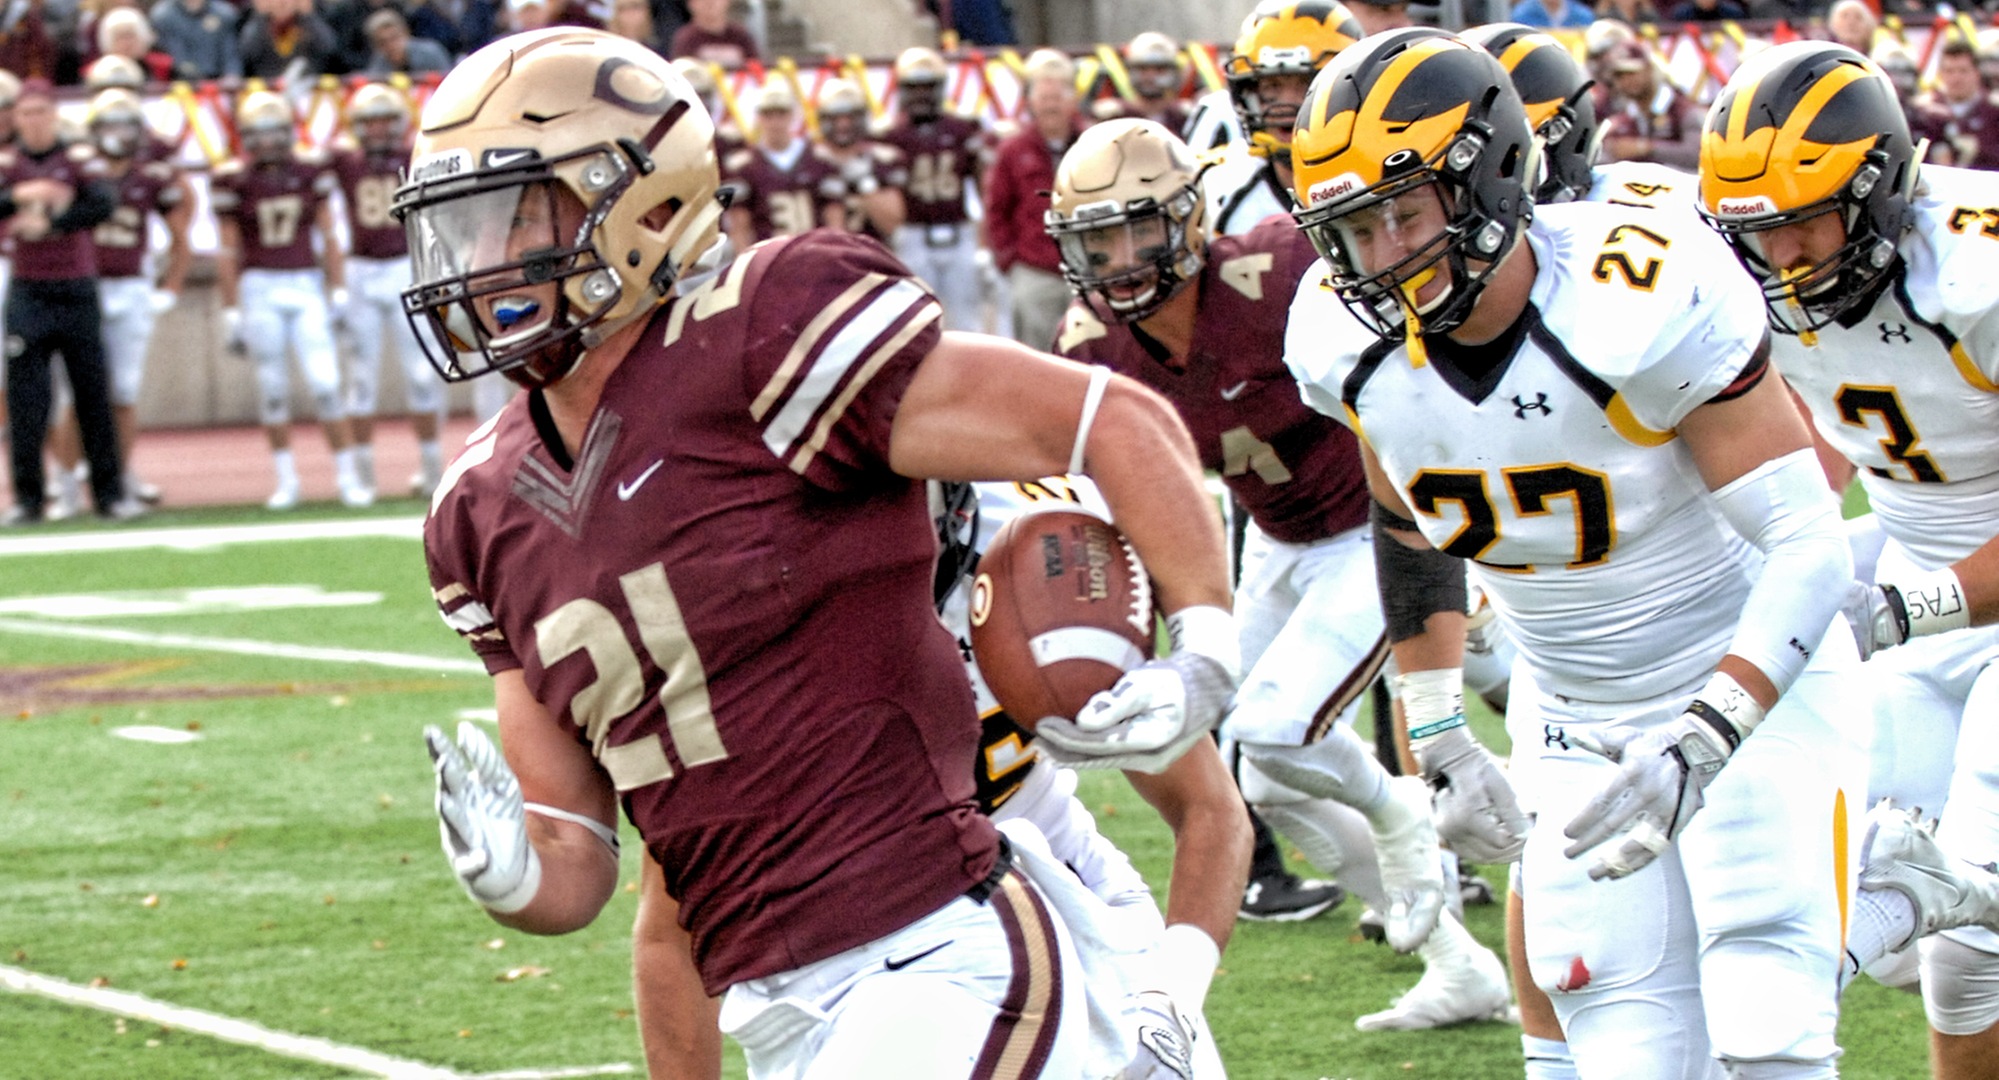 Senior Chad Johnson scored three TDs to break the school's all-time touchdown record in the Cobbers' 45-0 win at Hamline.